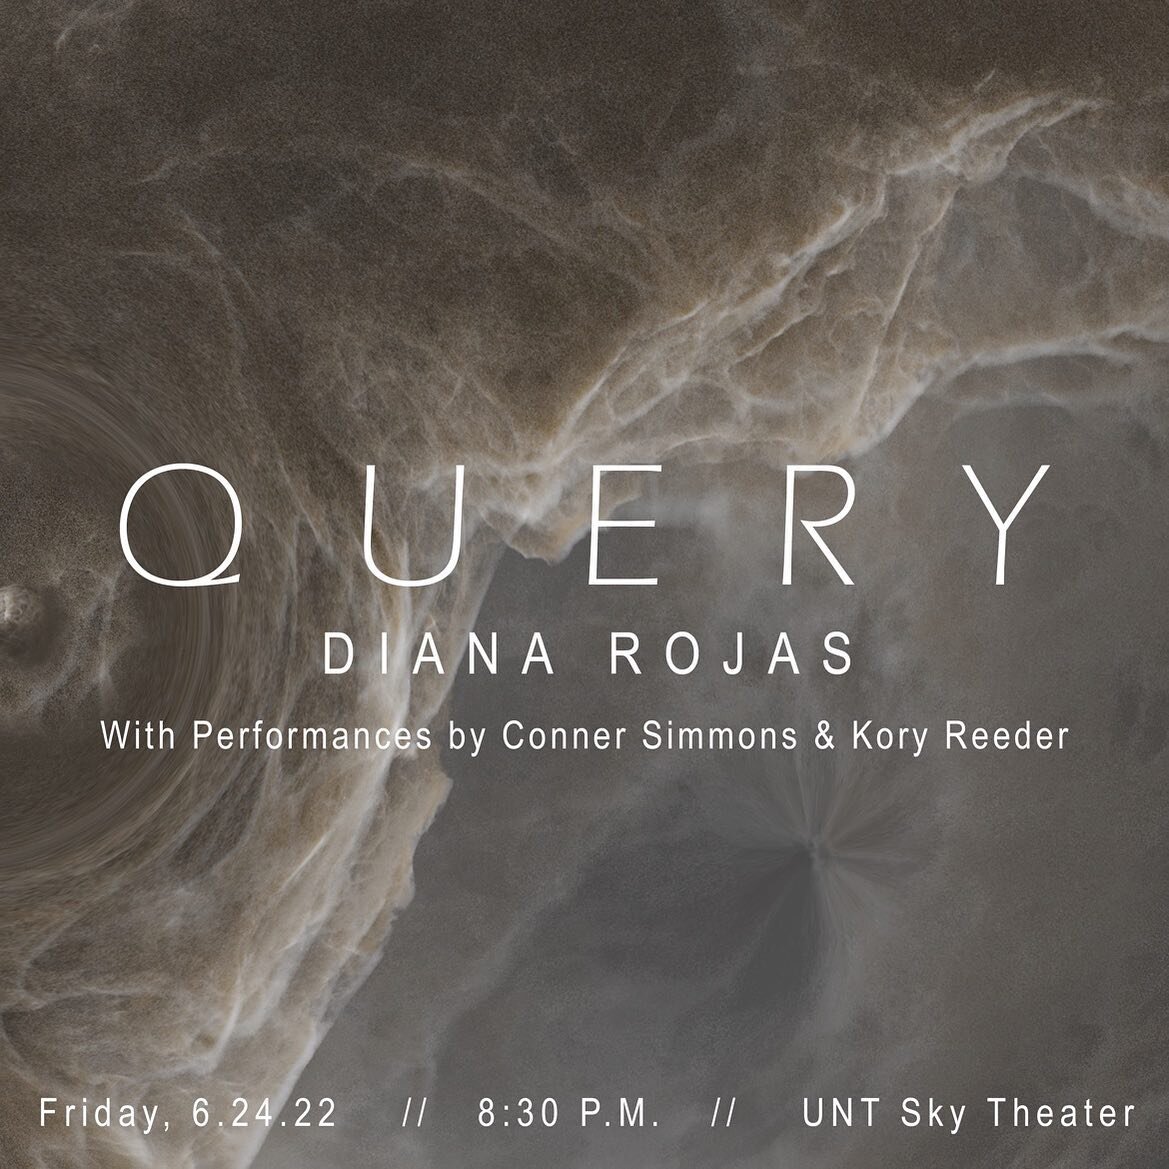 &quot;Query&quot; explores light bending as a signifier of the colossal and reminds us of the distance between us and the invisible and immense. 

Live sound performance by myself and @koryreeder. Immersive visuals by @dianarojasart. Black holes, bas